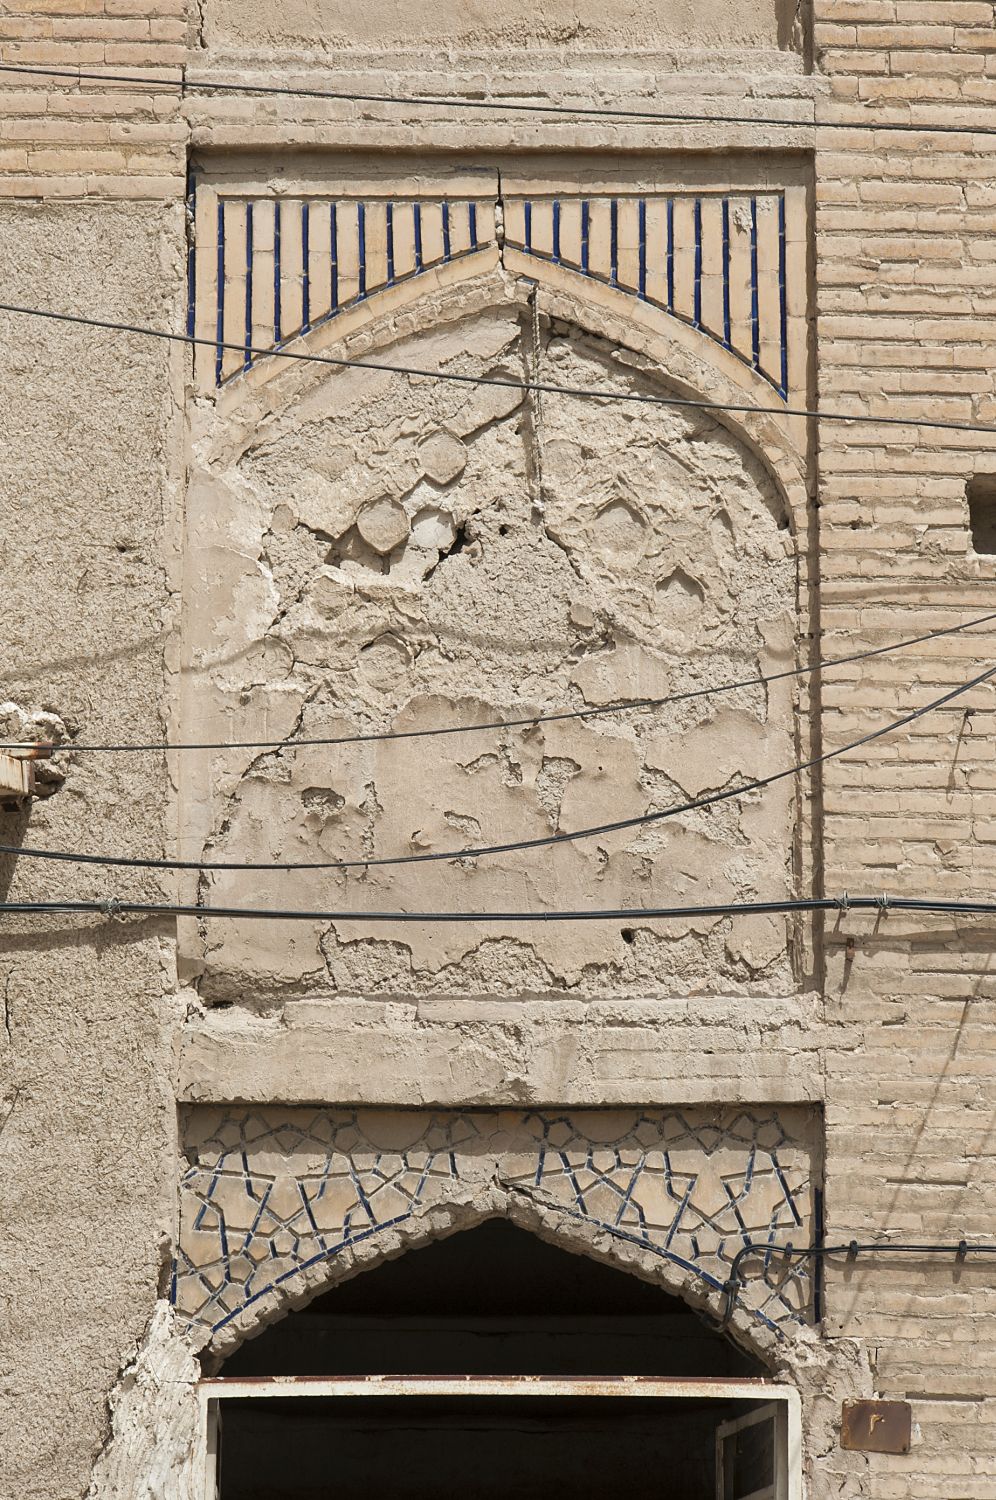 Saray-i Shah, remnants of wall decoration on courtyard facade.